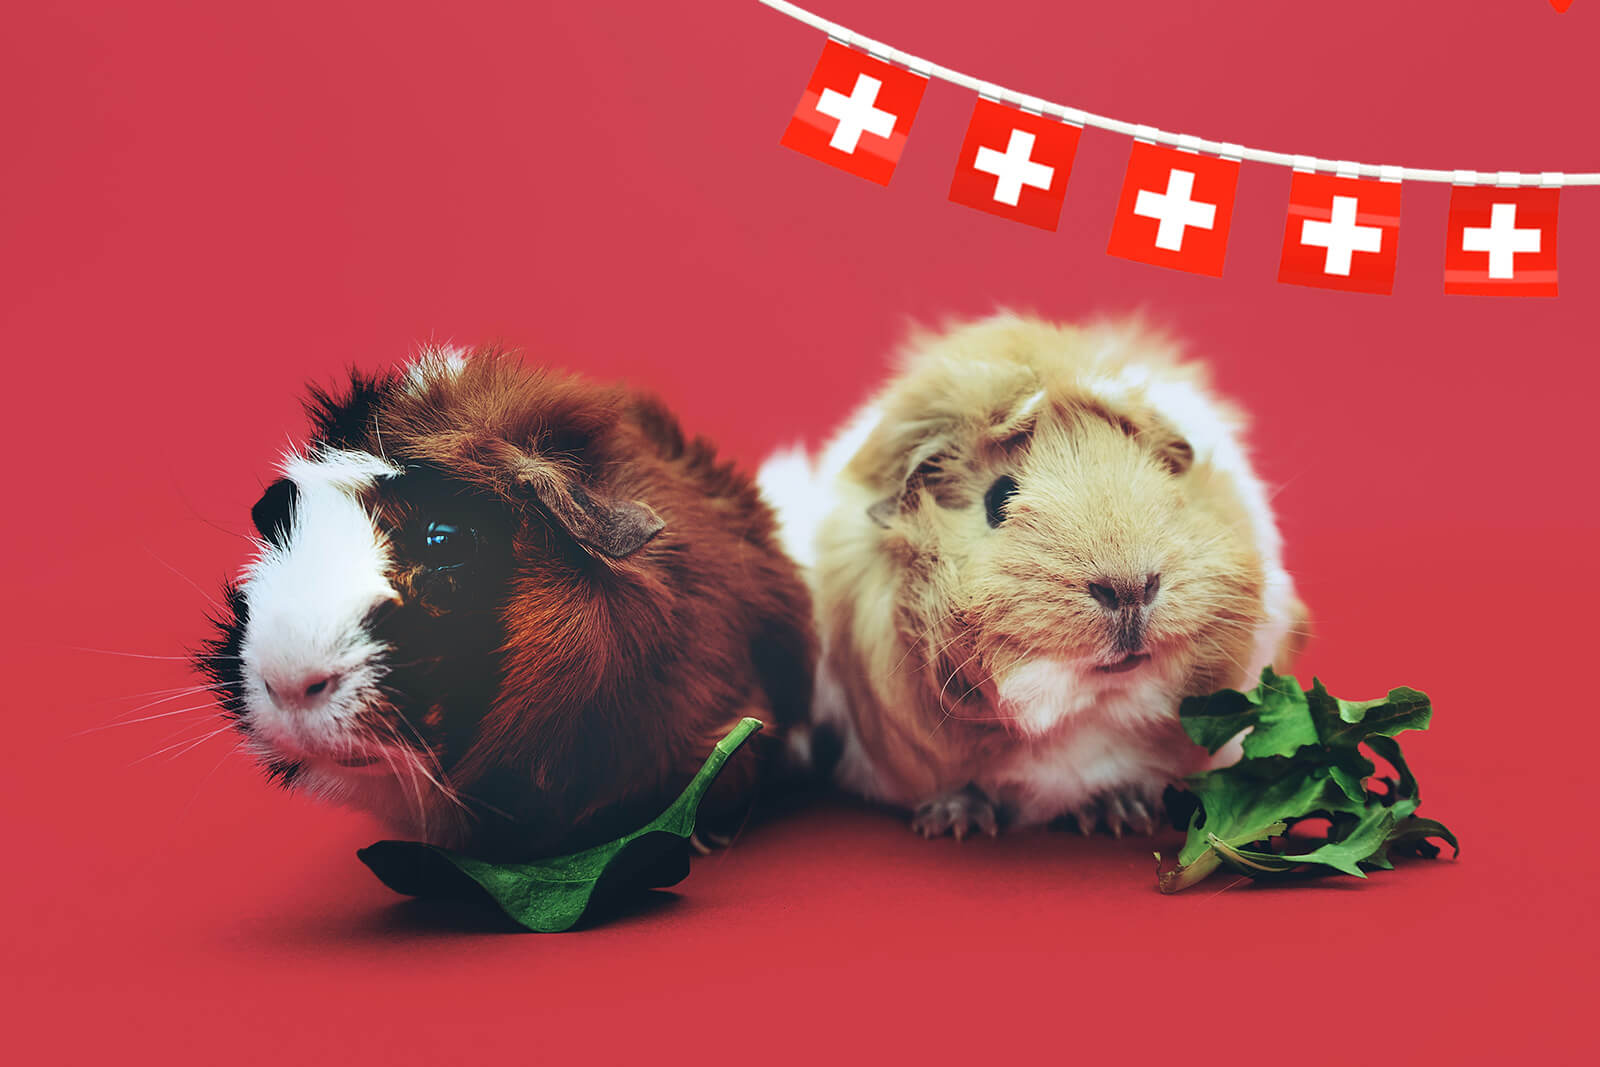 Swiss Laws - Two Guinea Pigs